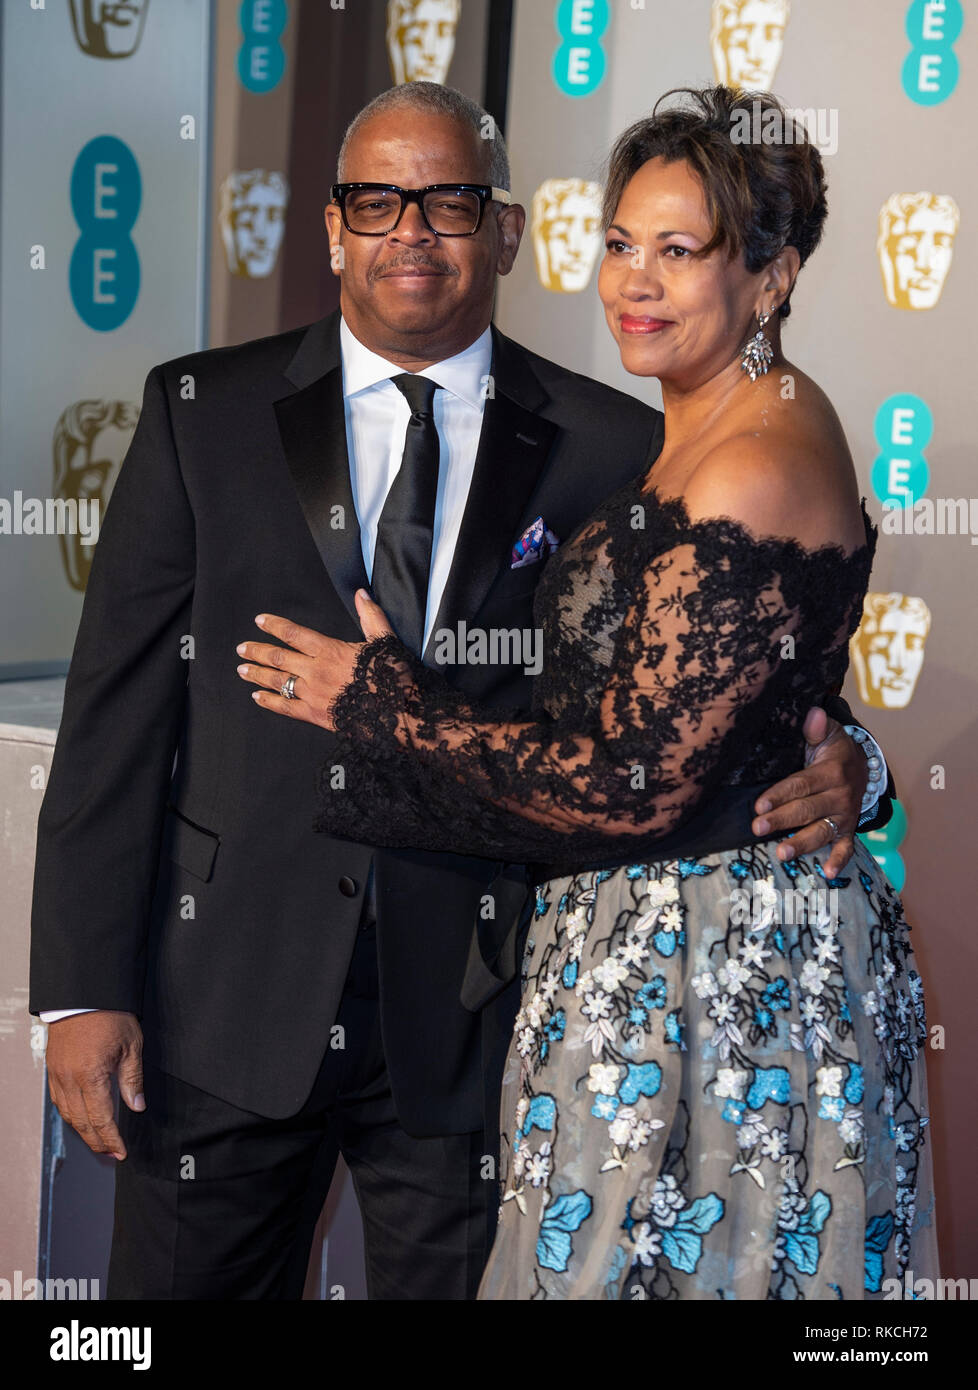 London, UK. 10th Feb, 2019. Terence Blanchard and Robin Burgess attends the EE British Academy Film Awards at the Royal Albert Hall, London, England on the 10th February 2019 Credit: Gary Mitchell, GMP Media/Alamy Live News Stock Photo